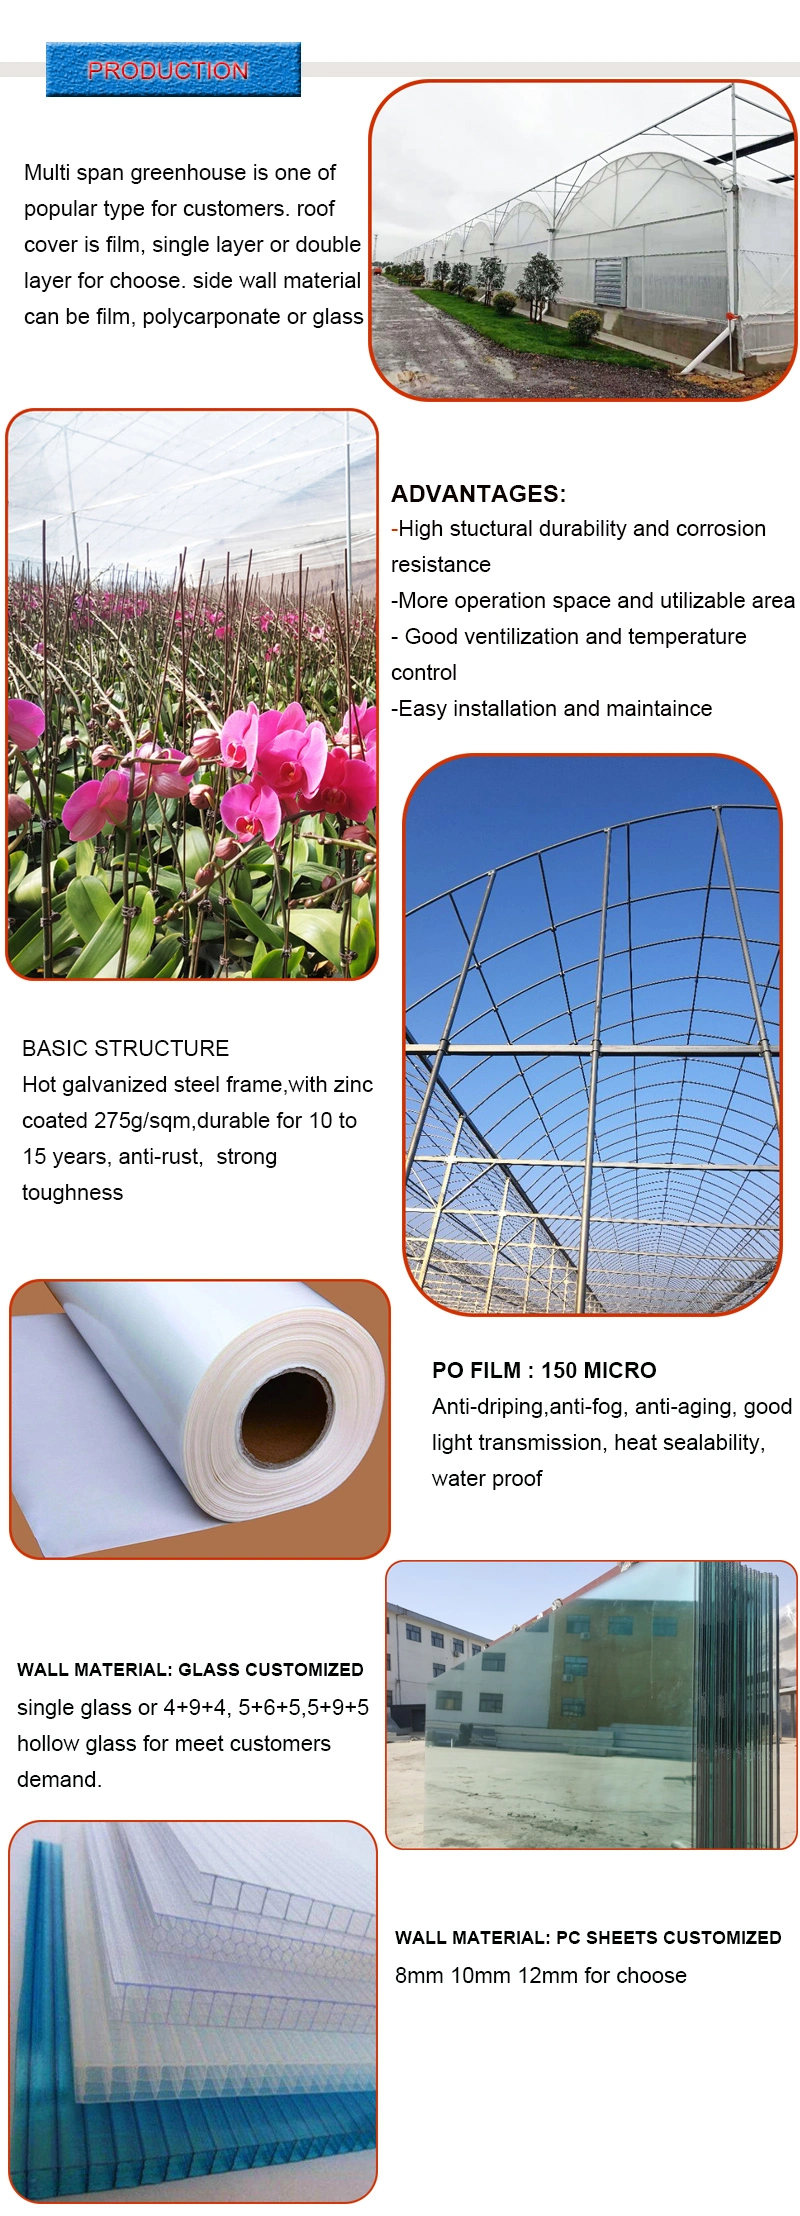 Plastic Film Green House/Hydroponic Venlo Glass/Greenhouse for Farming Agriculture of Vegetables/Flowers/Tomato/Garden